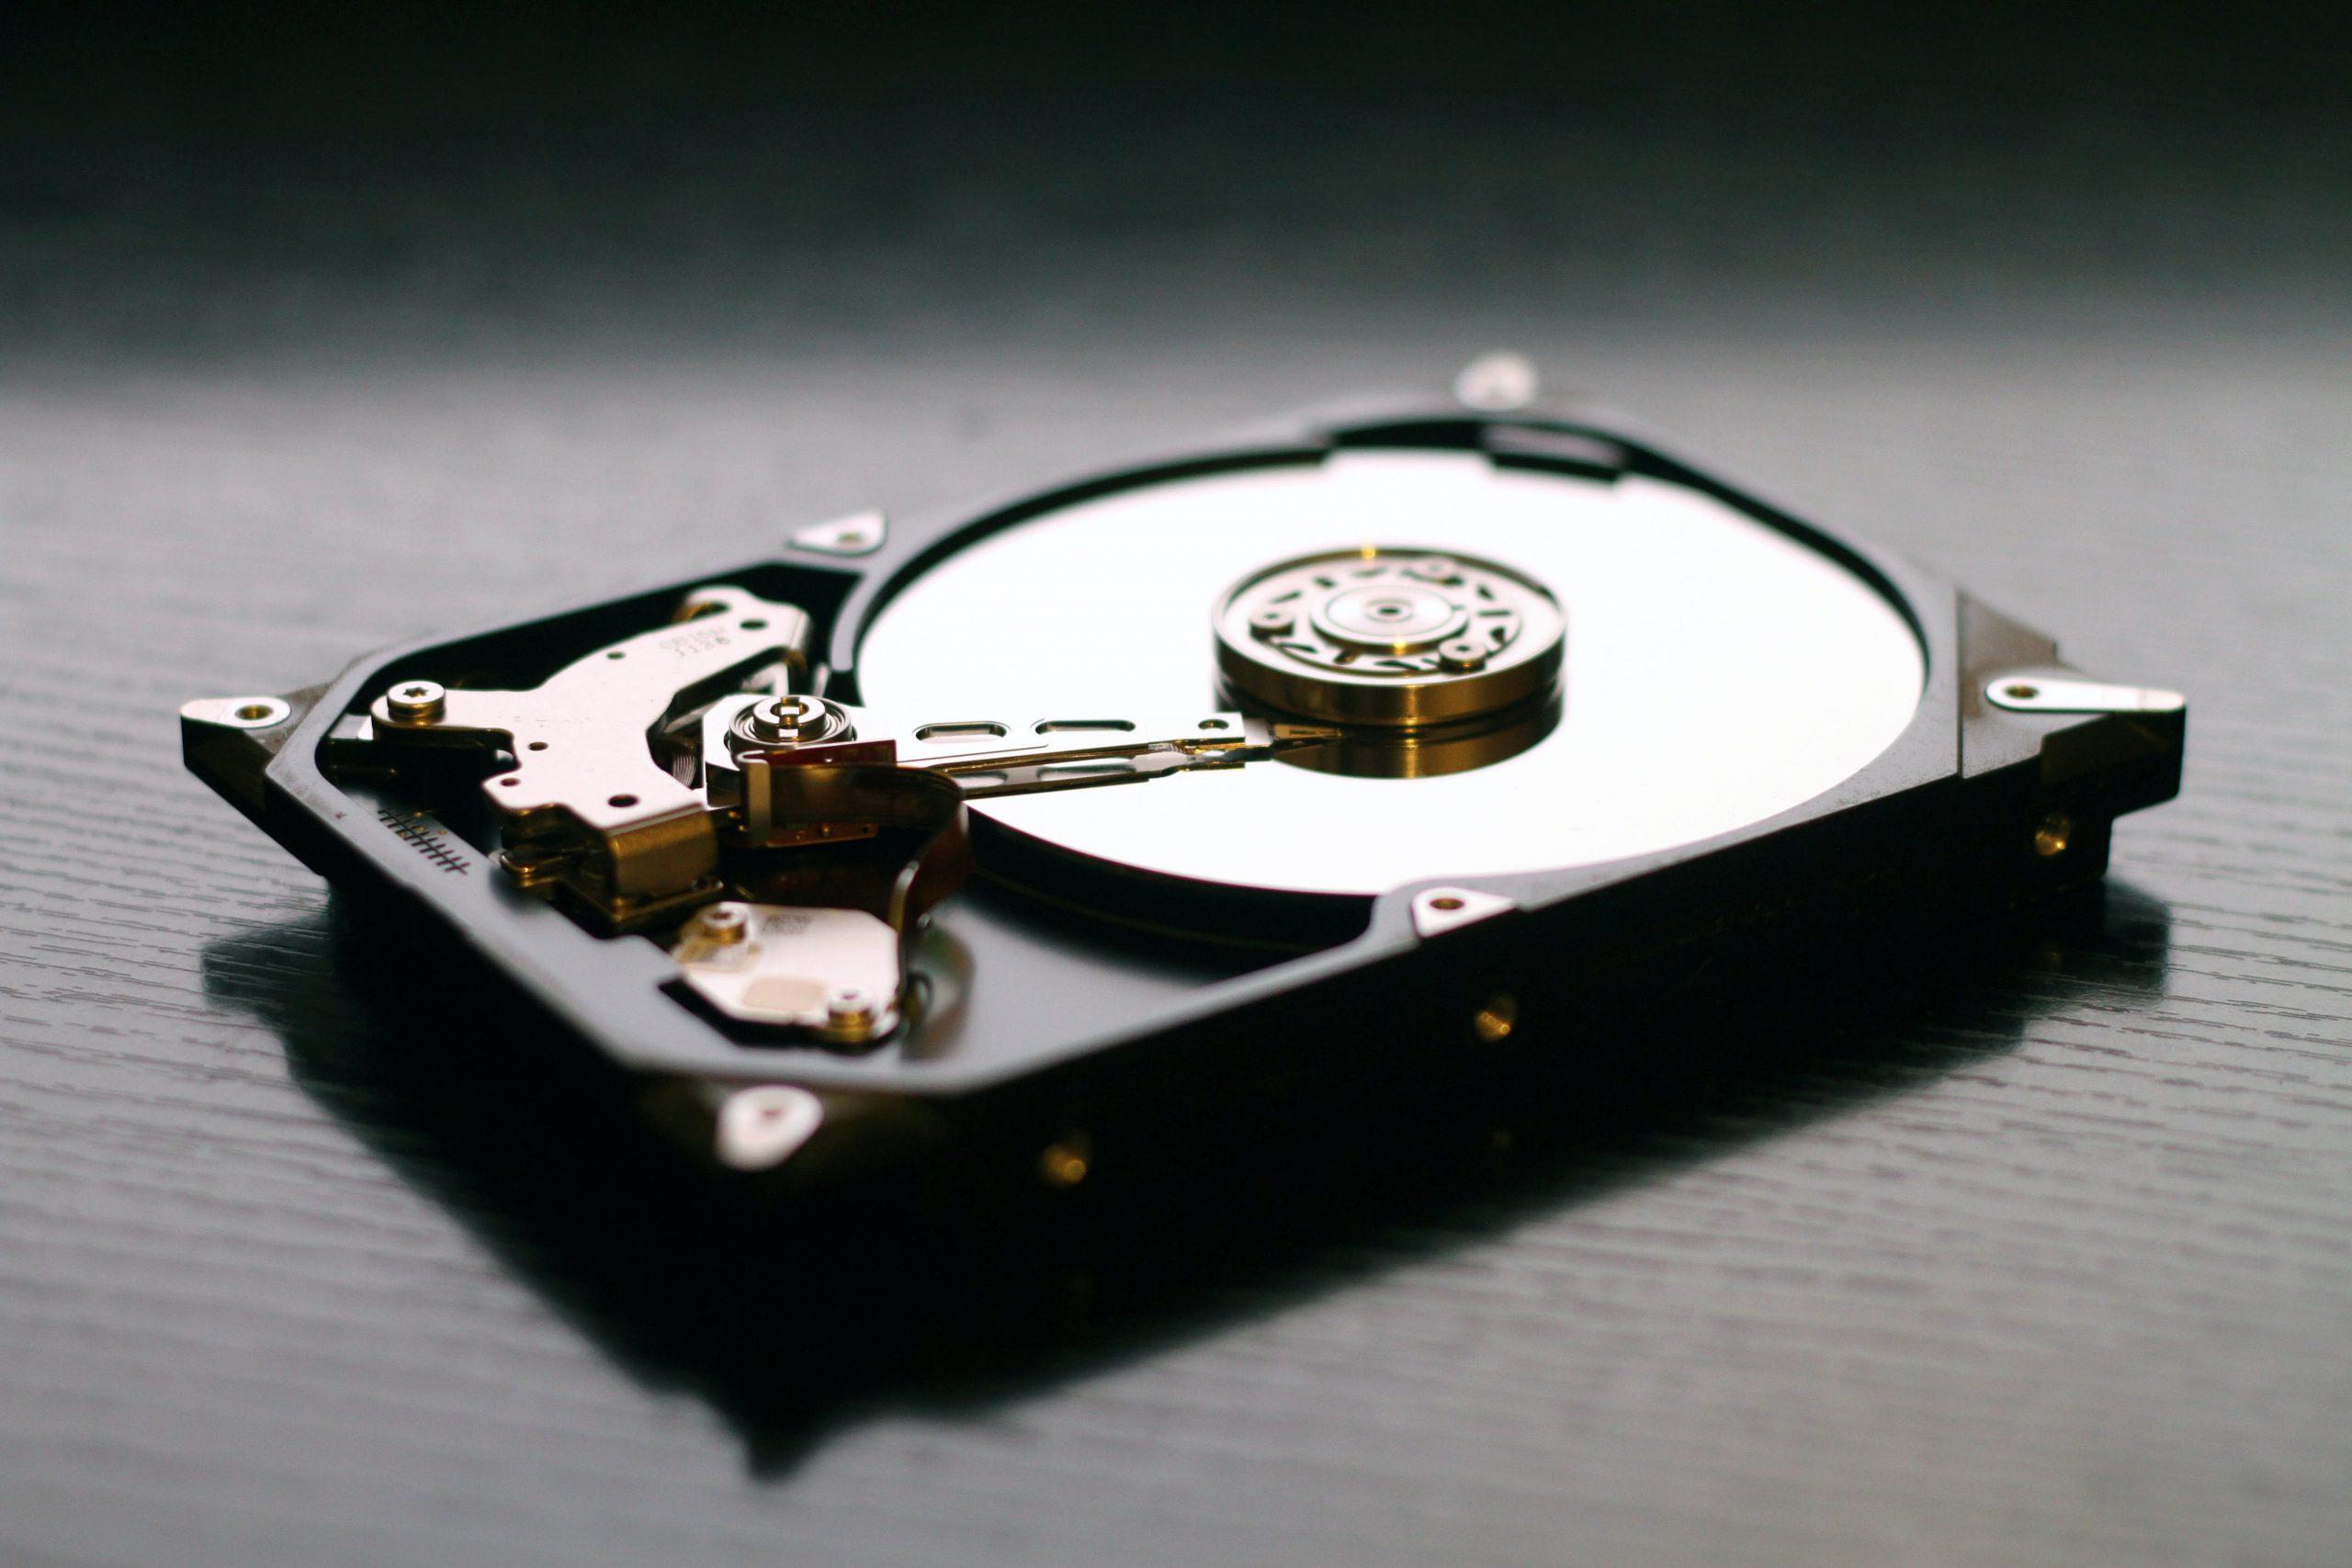 Hard Drive 101 Basics Guide - Secure Data Recovery Services